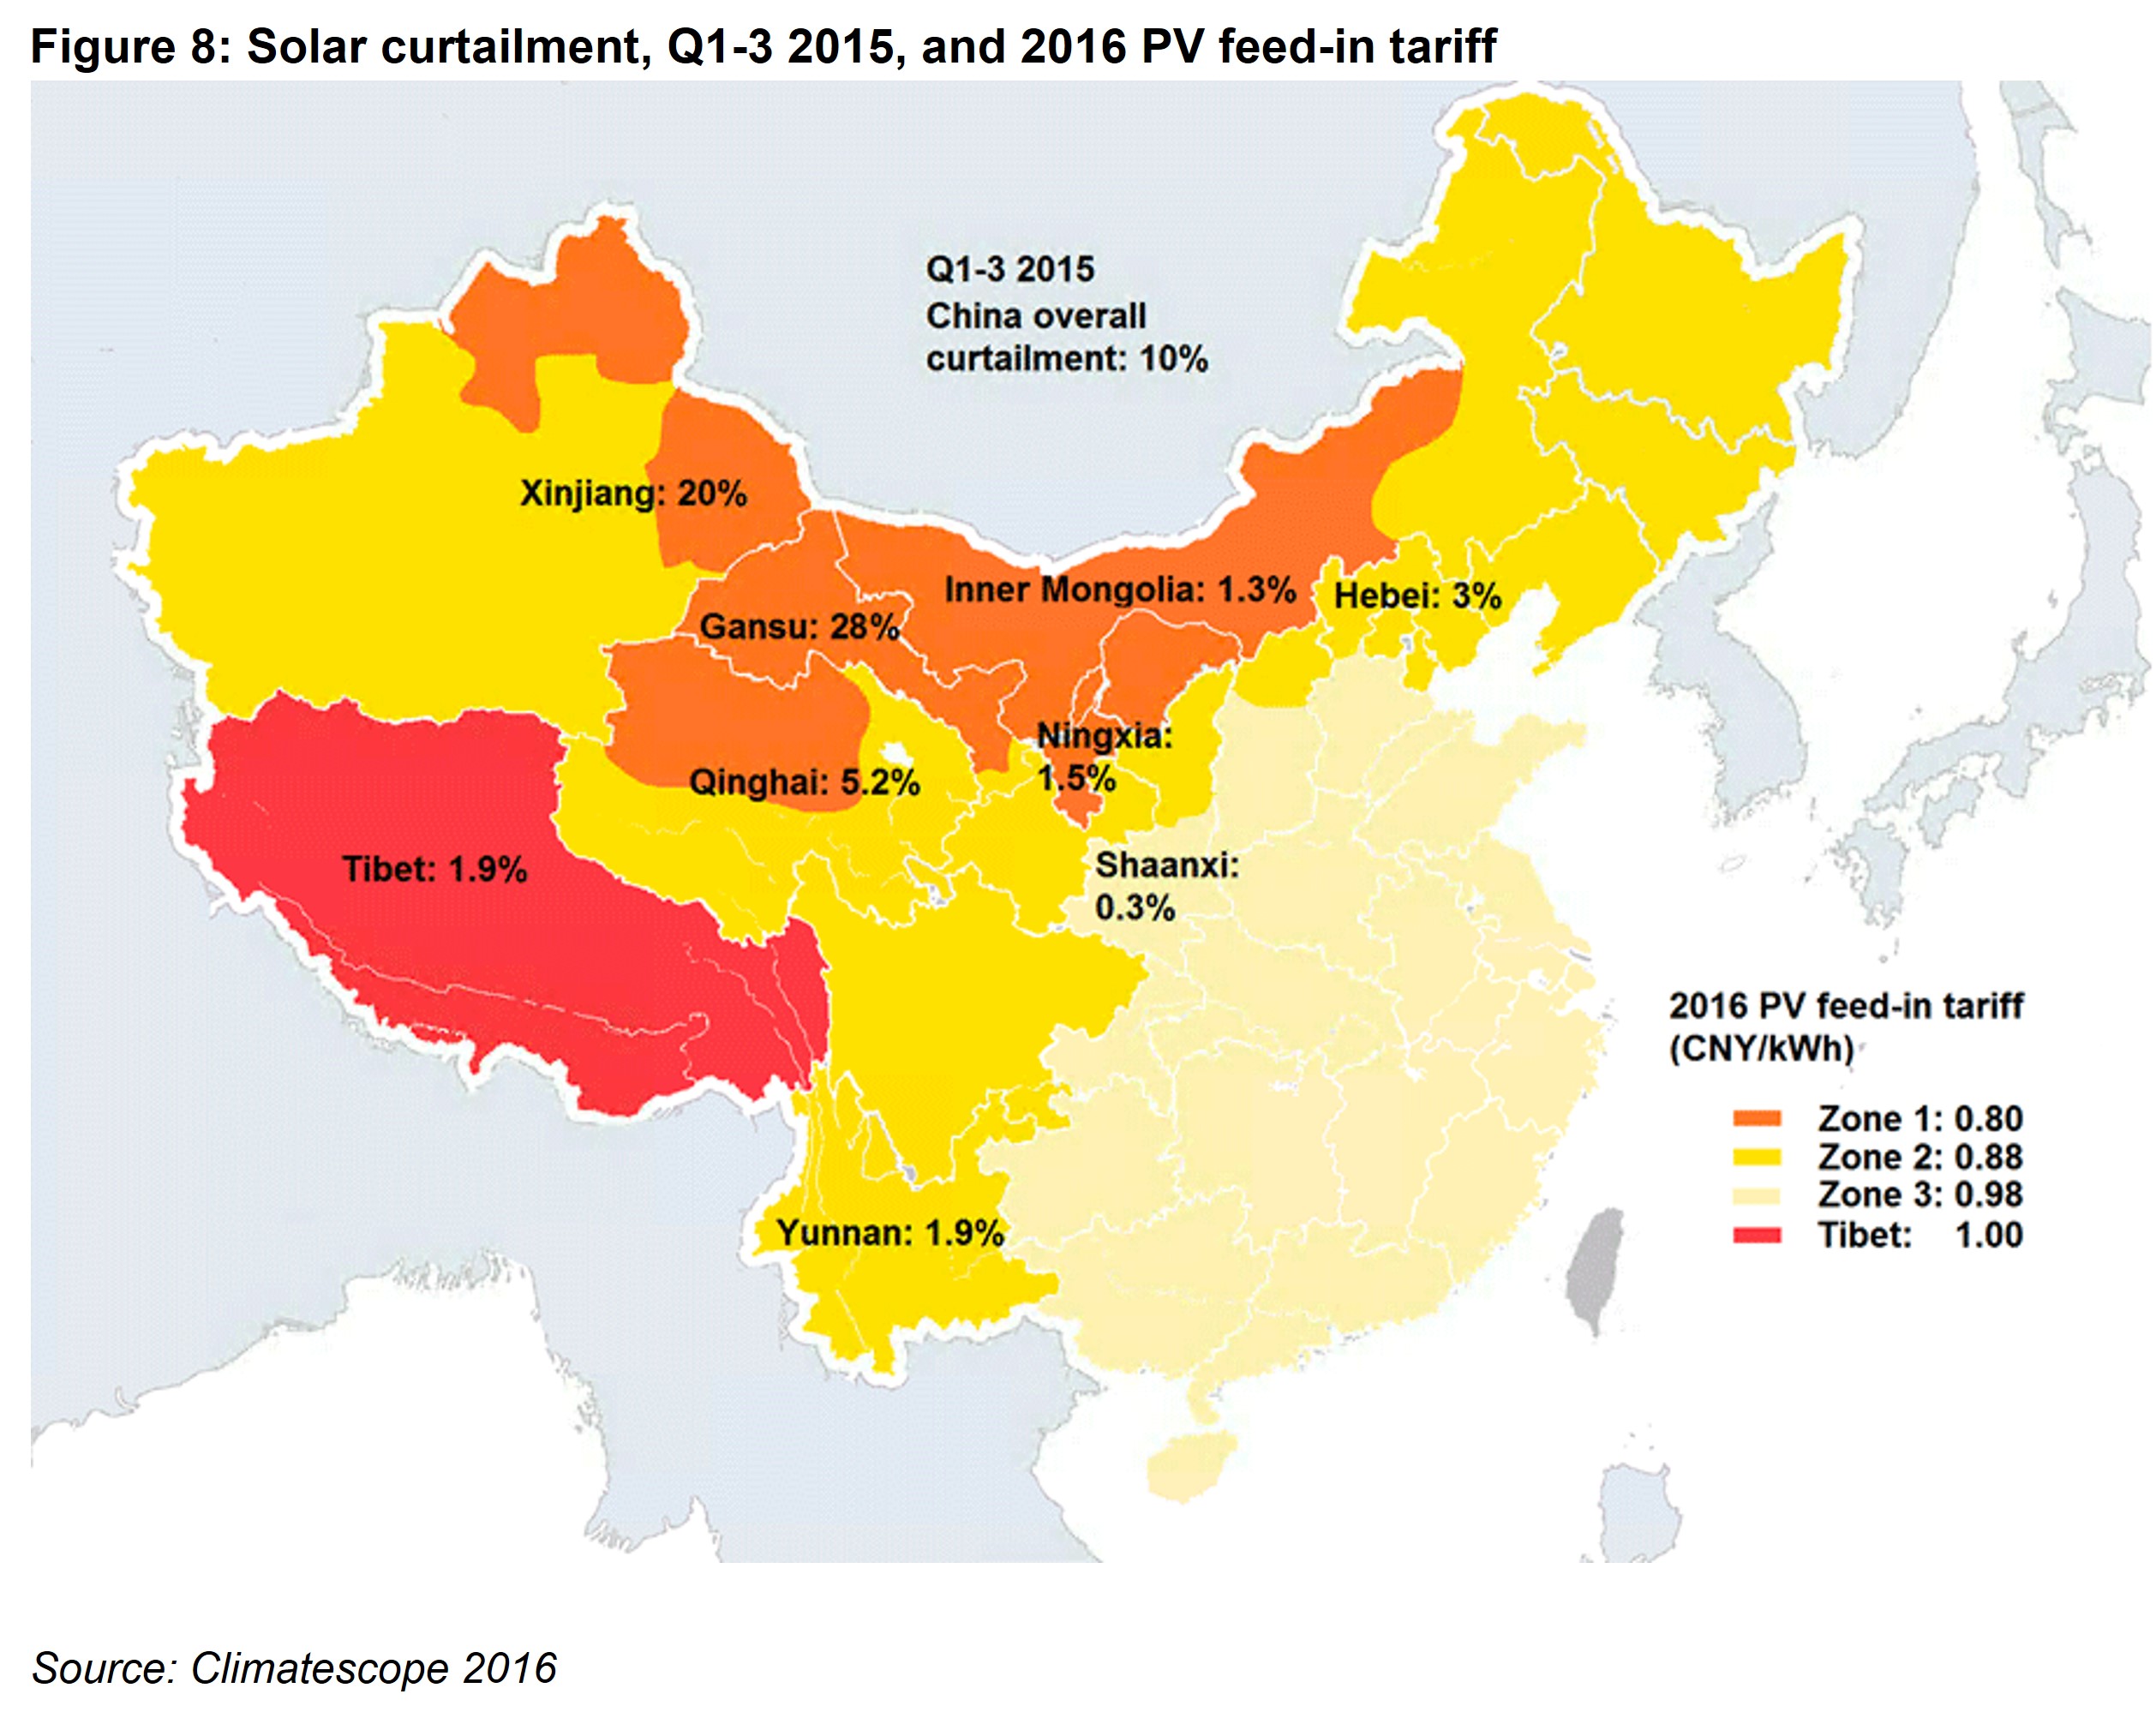 Asia Fig 8 - Solar curtailment, Q1-3 2015, and 2016 PV feed-in tariff